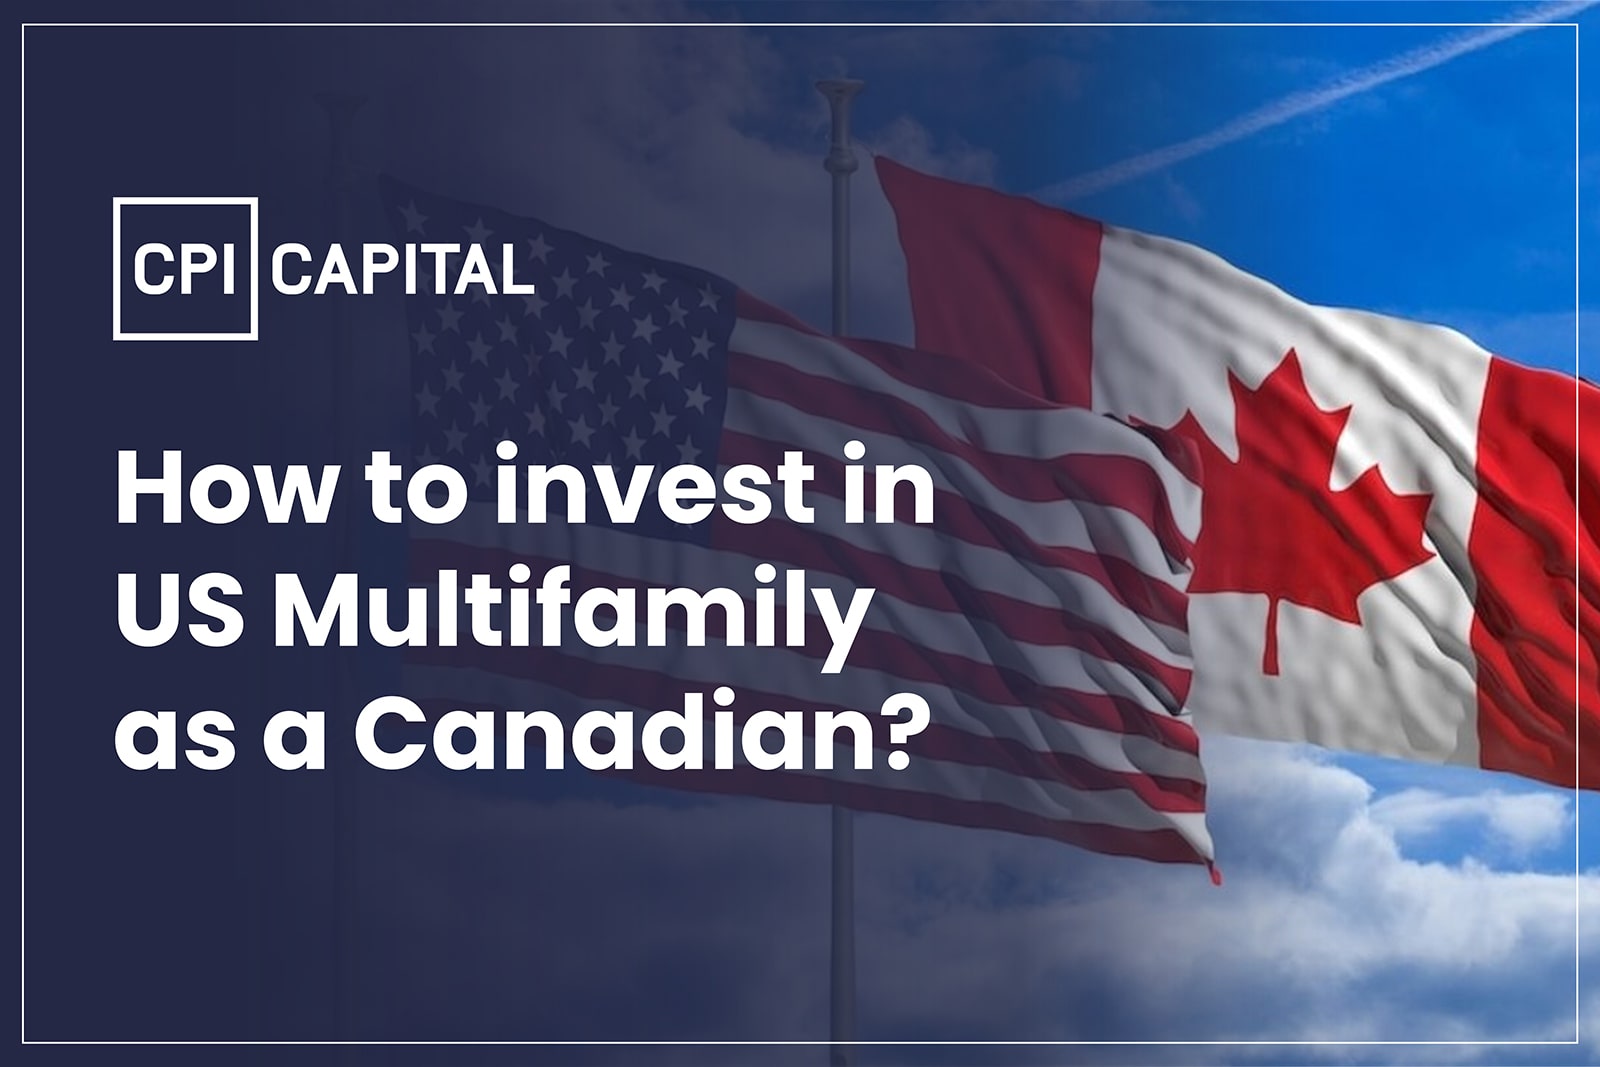 CPI capital_How to invest in US Multifamily as a Canadian